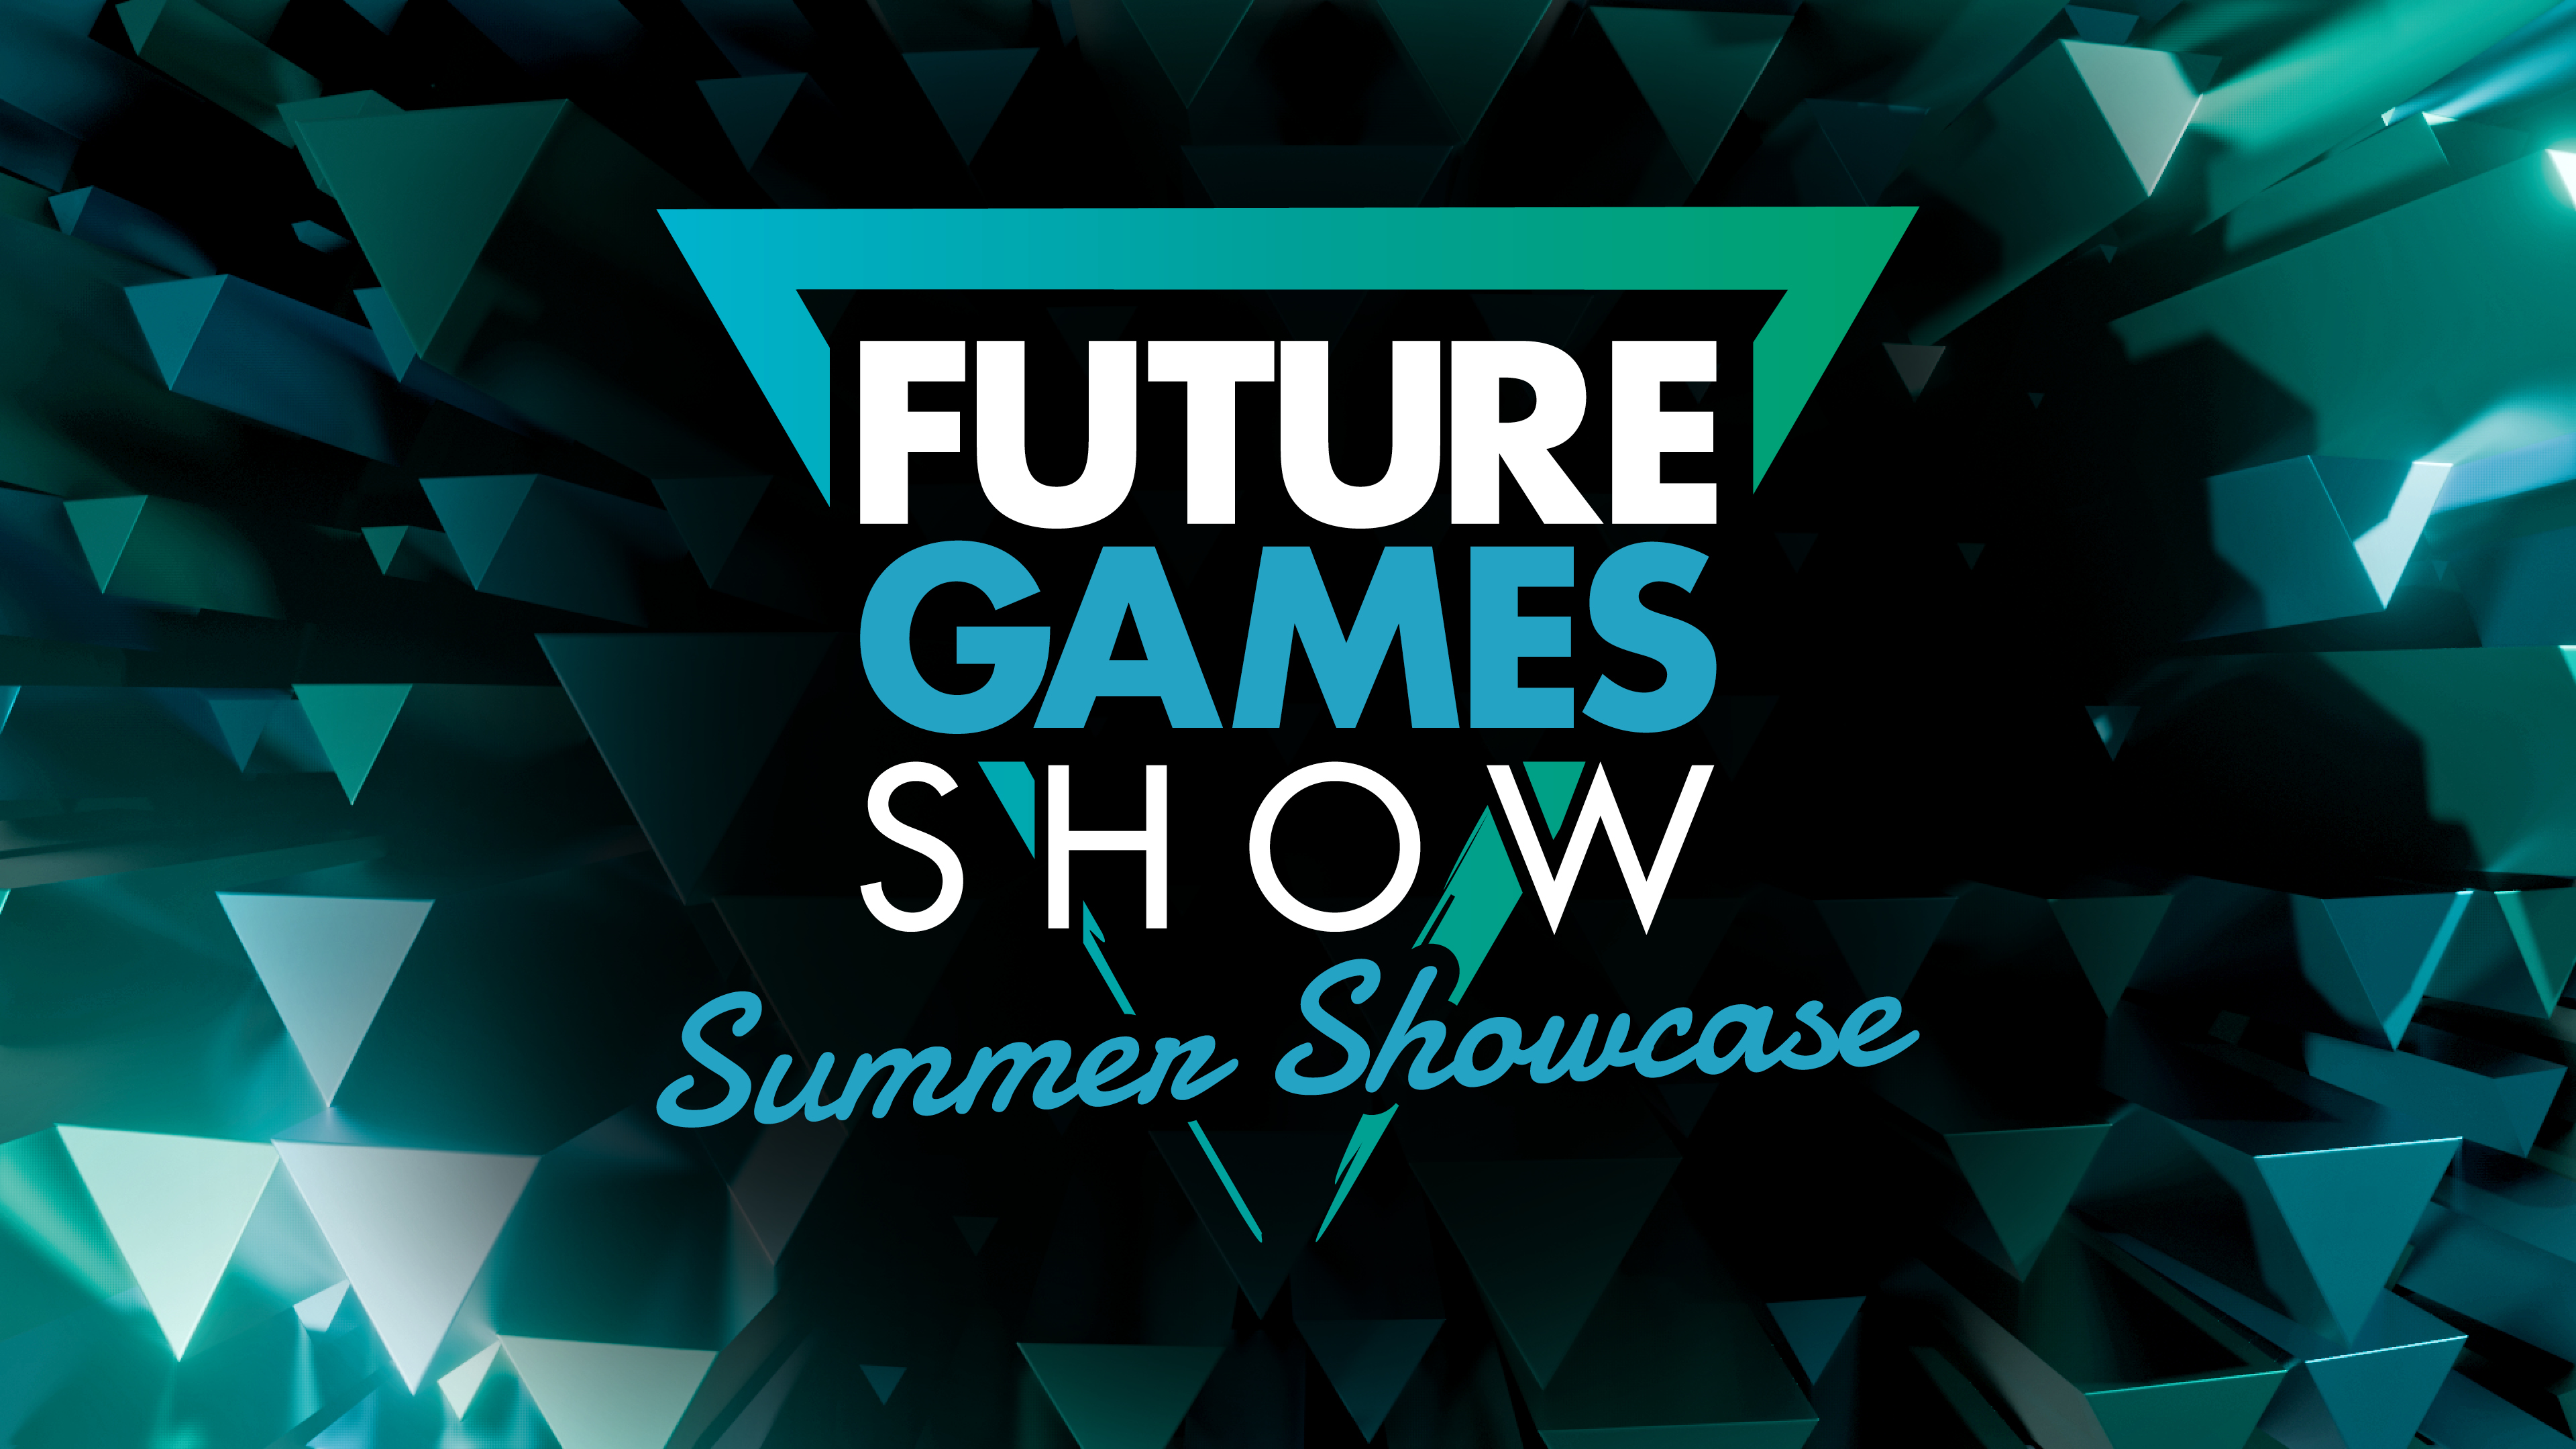  The Future Games Show Summer Showcase is back with a bang this June, and here's where and when to watch 